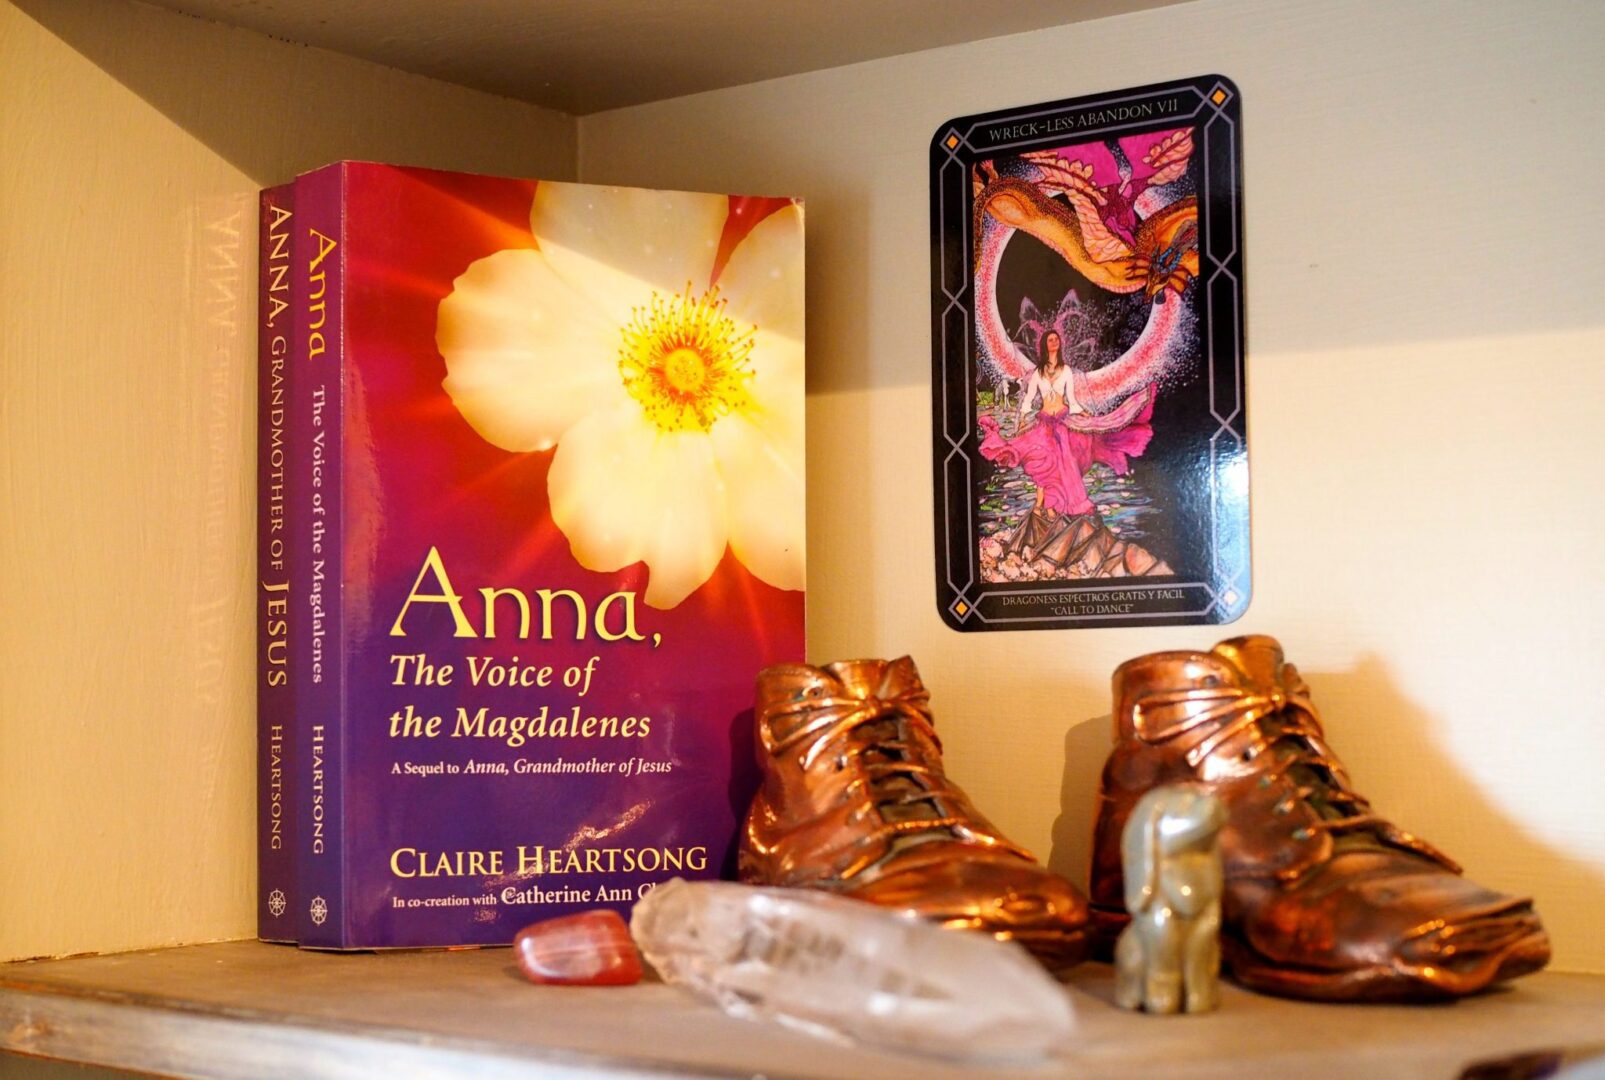 A book and some boots on top of a shelf.